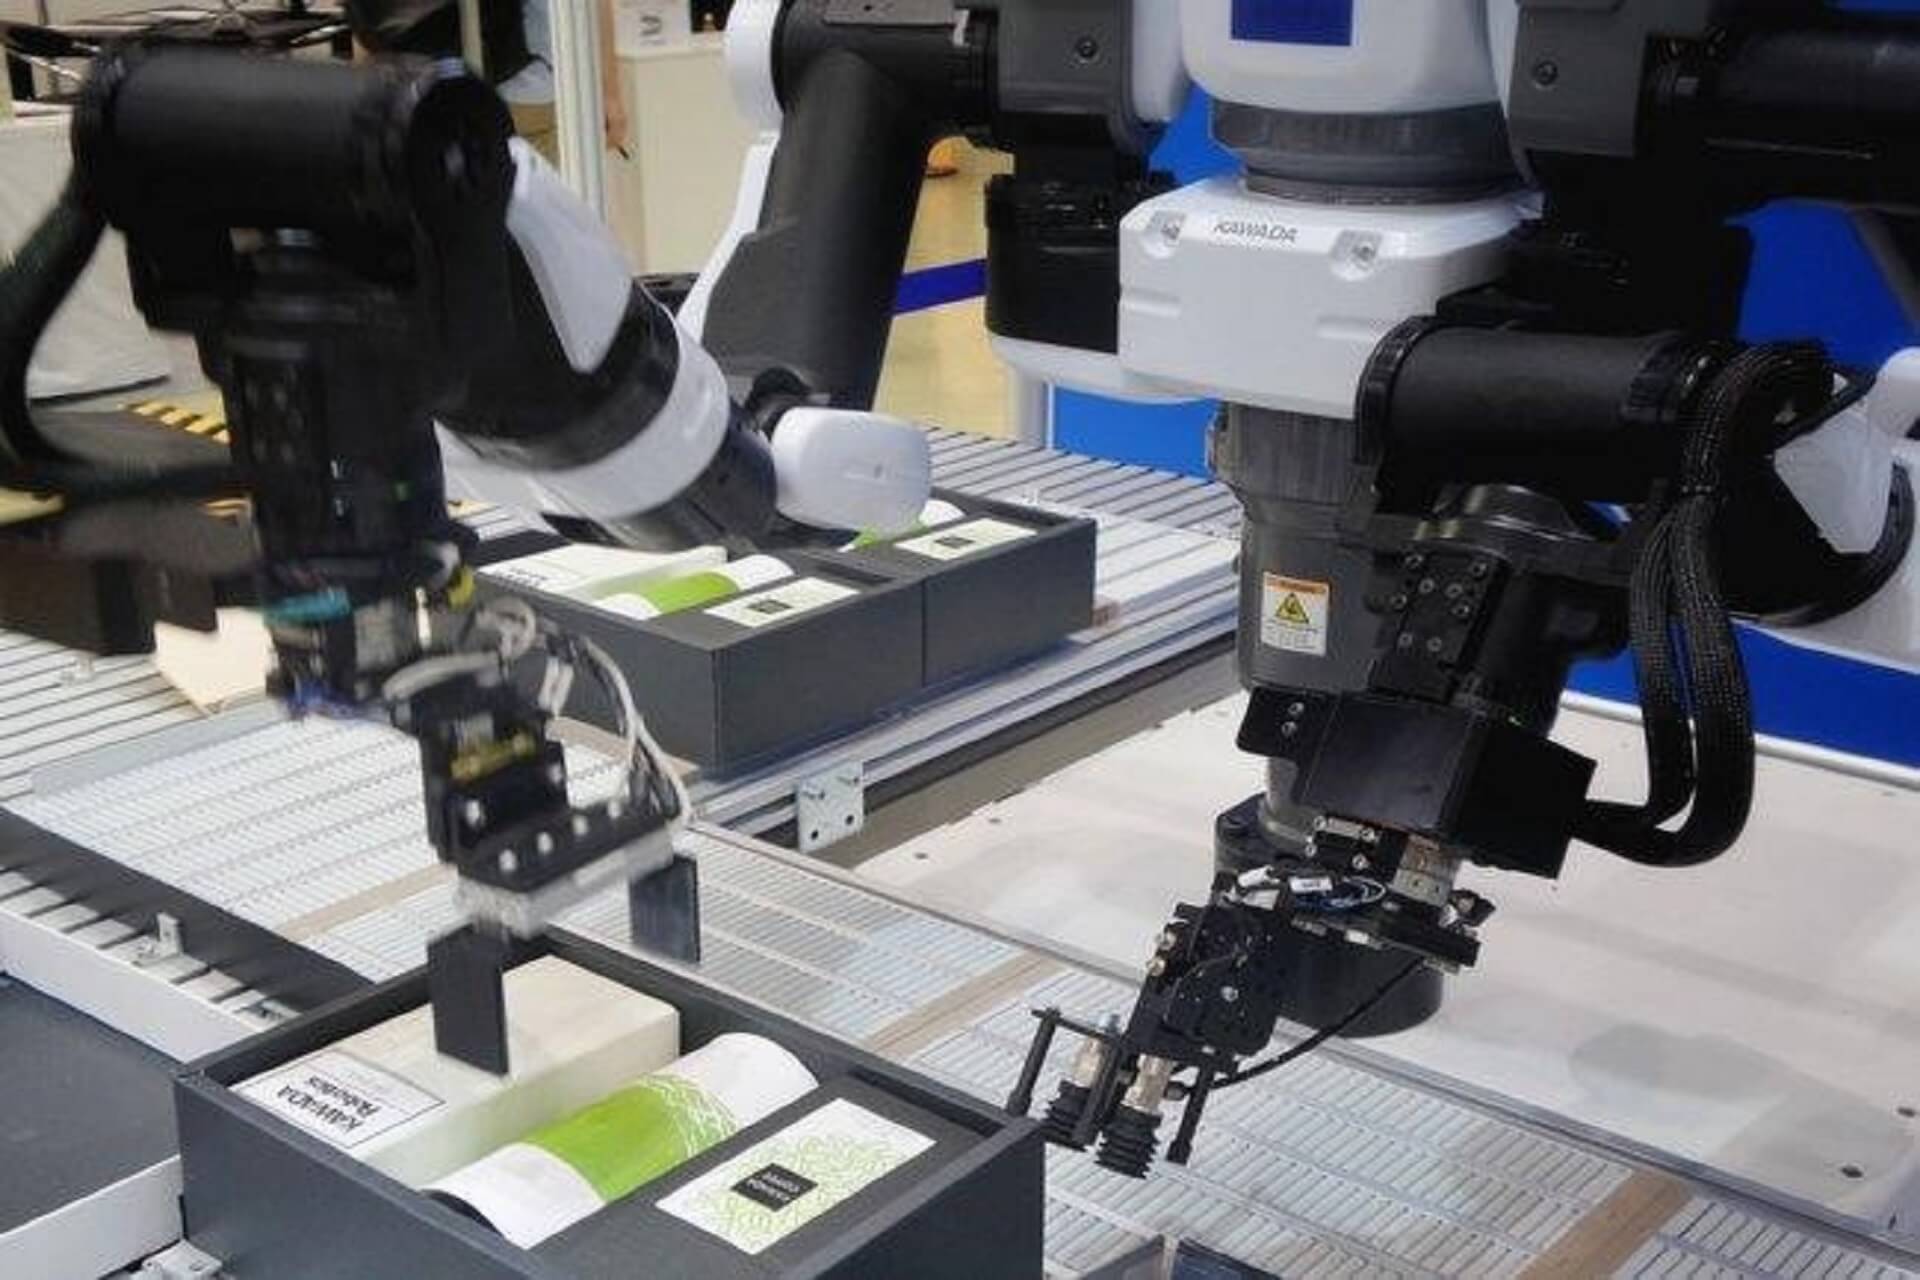 How Robotic Fulfillment Technology is Changing The Supply Chain